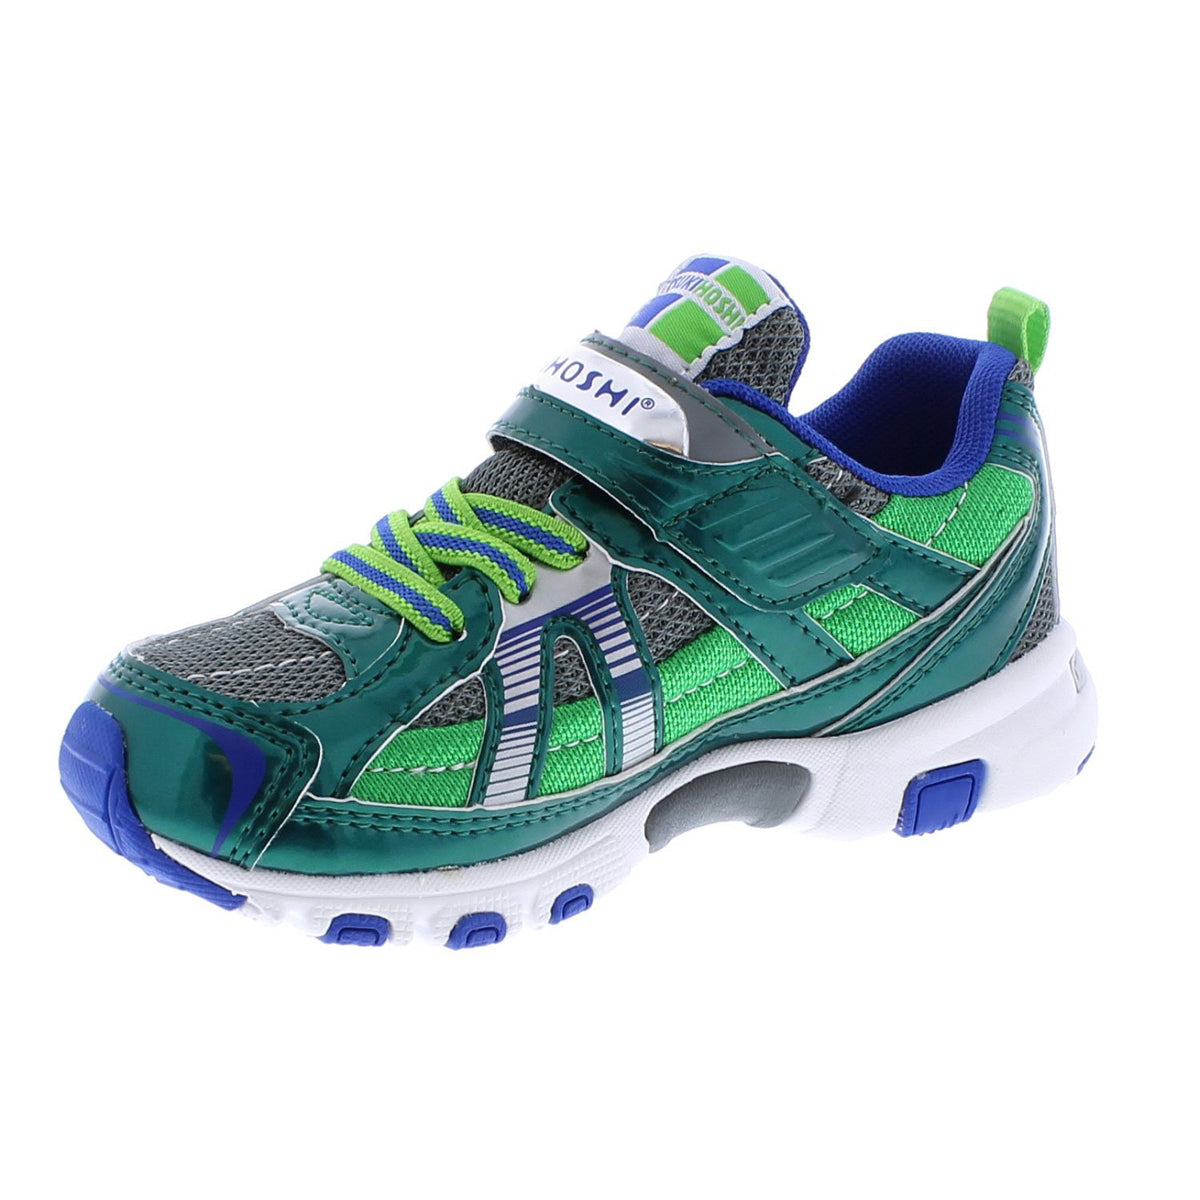 Childrens Tsukihoshi Storm Sneaker in Green/Gray from the front view